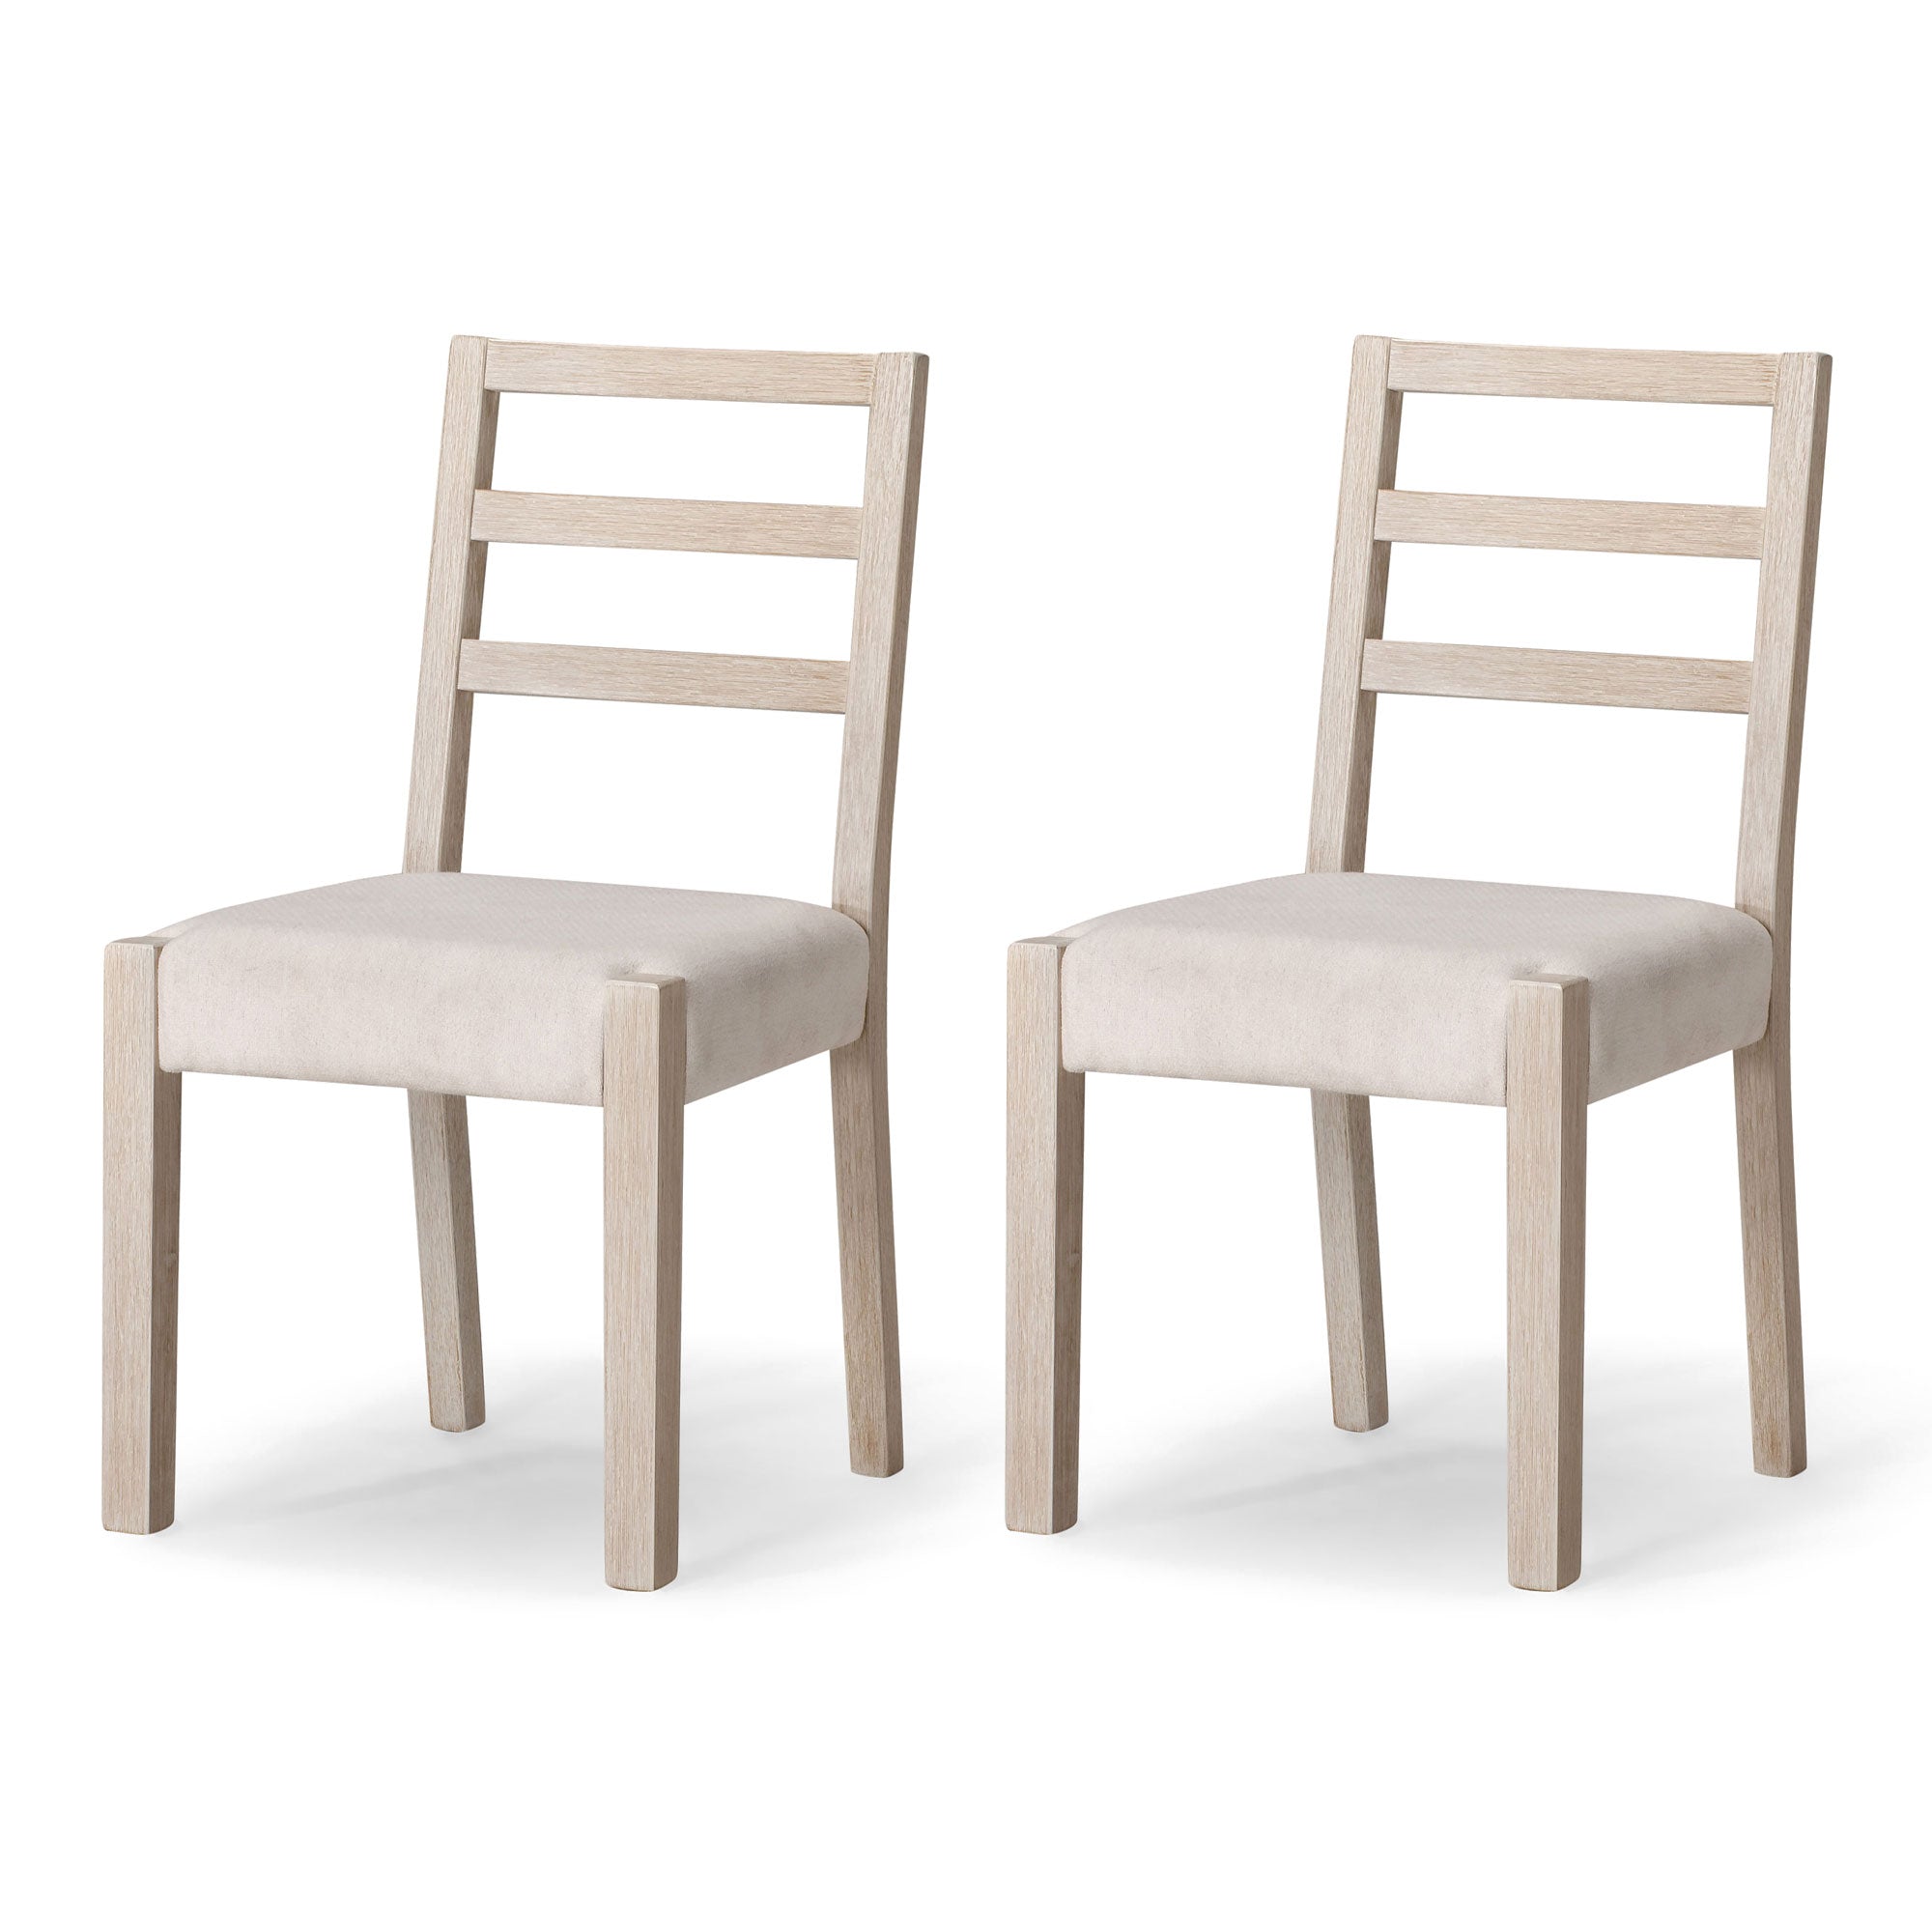 Maven-Lane-Willow-Rustic-Dining-Chair,-White-With-Cream-Weave-Fabric,-Set-of-2-Kitchen-&-Dining-Room-Chairs